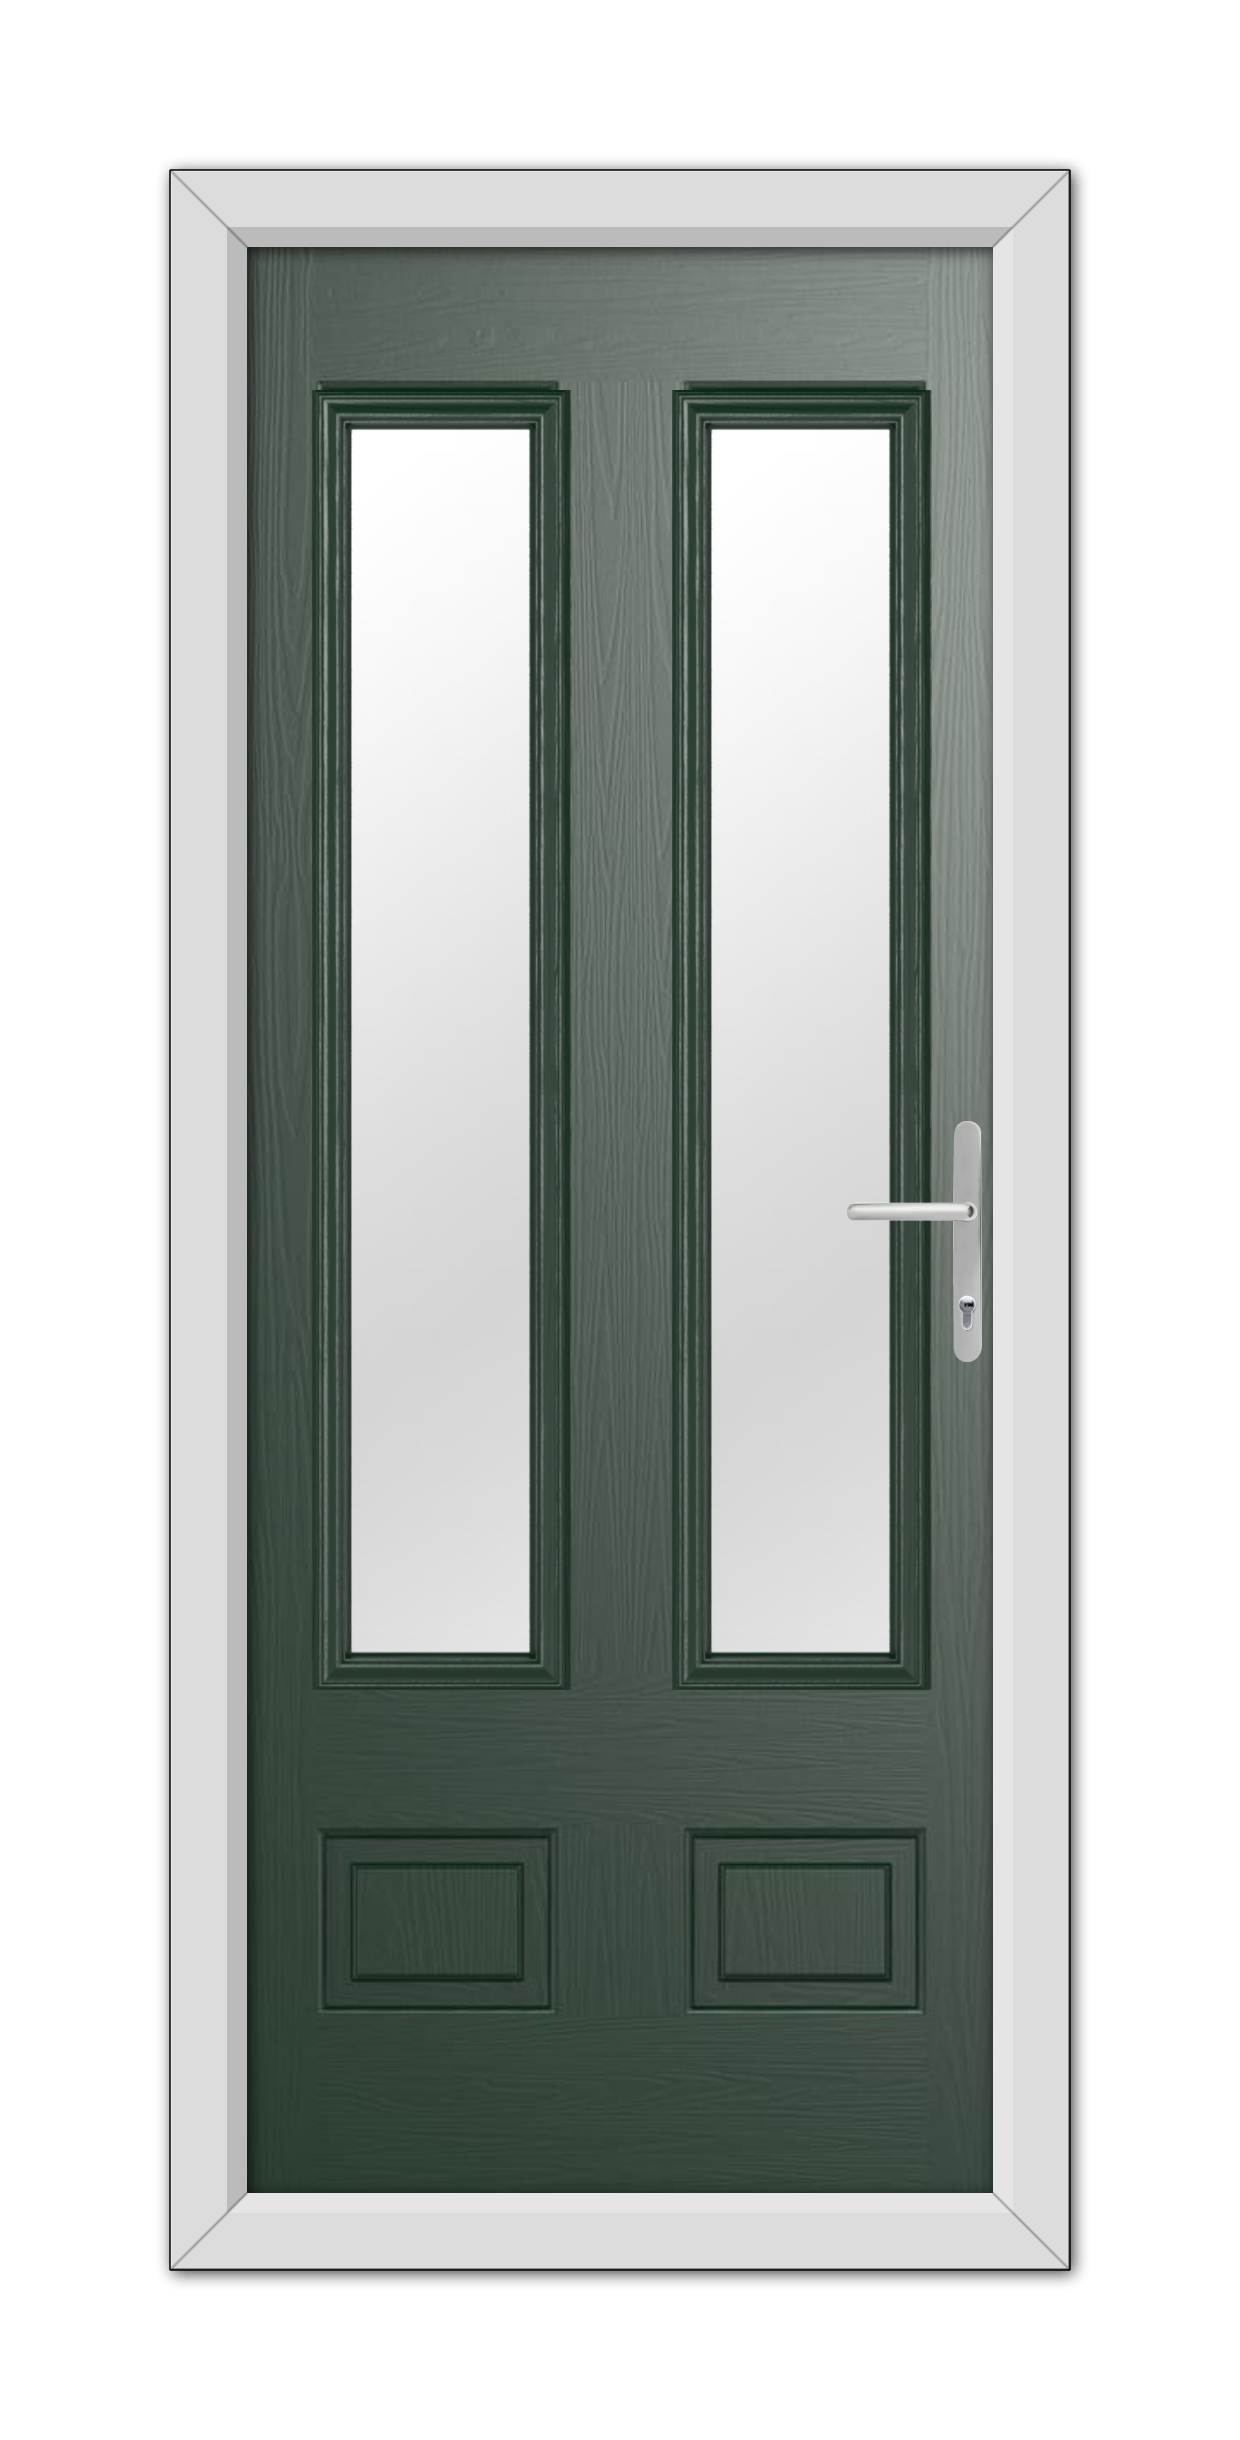 Green Aston Glazed 2 Composite Door 48mm Timber Core with vertical rectangular glass panels, white frame, and a silver handle on the right side.